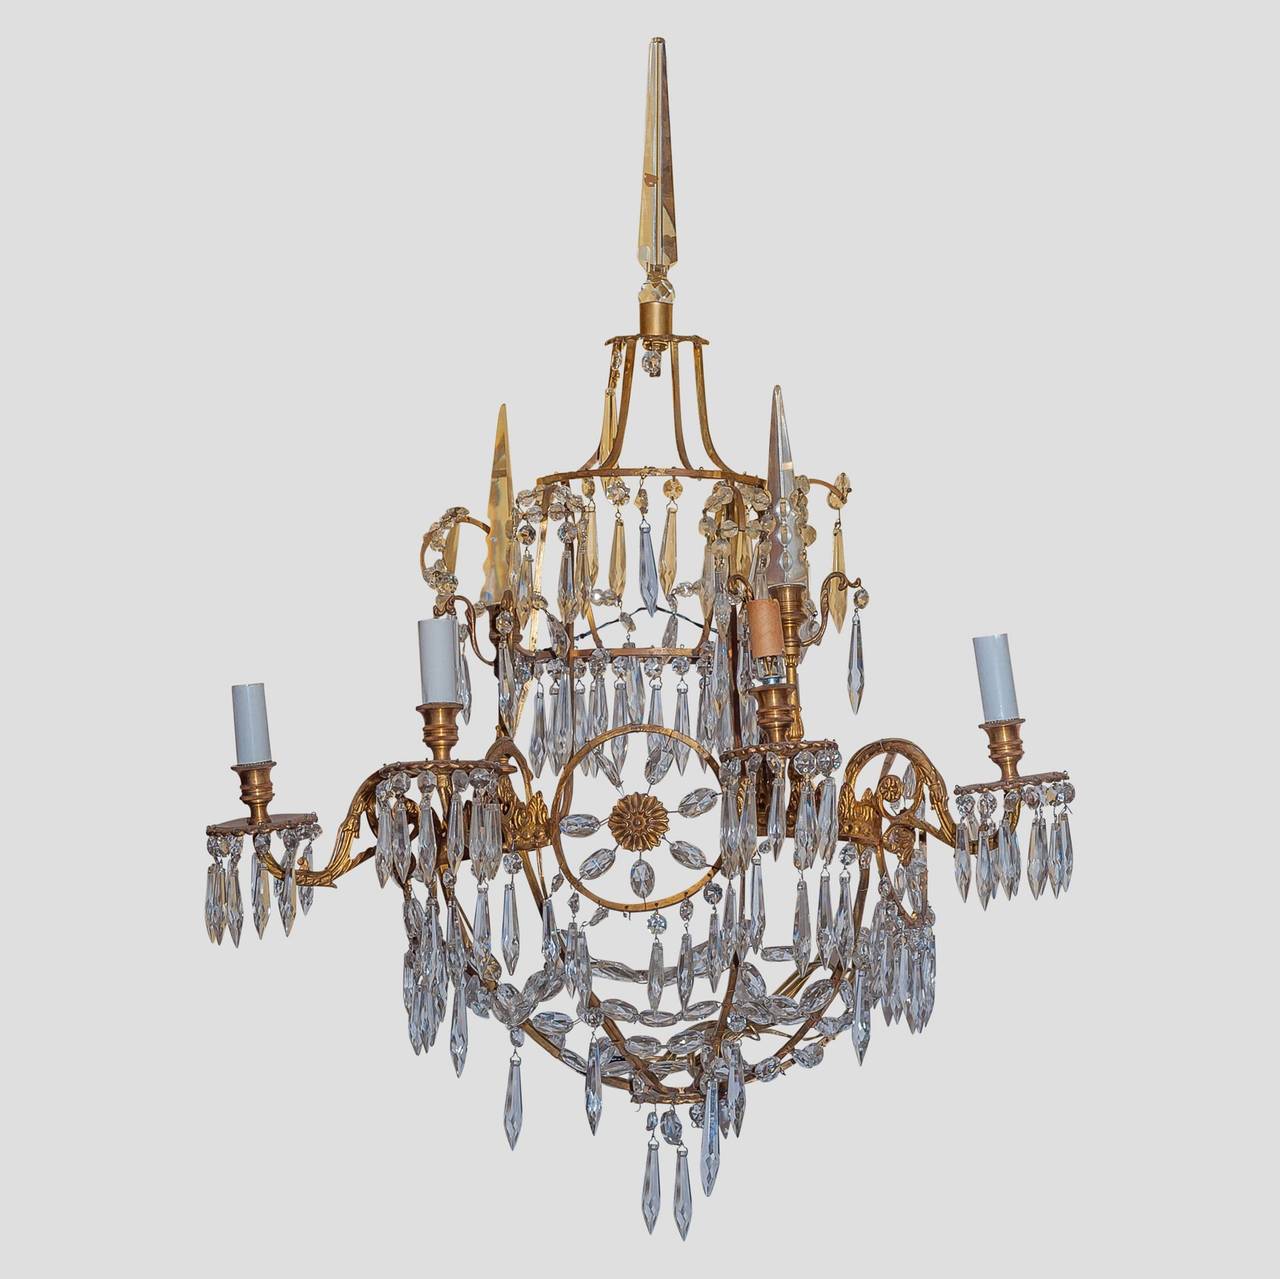 Pair of Russian or Baltic Crystal and Bronze Neoclassical Wall Light Sconces
Stock Number: L286